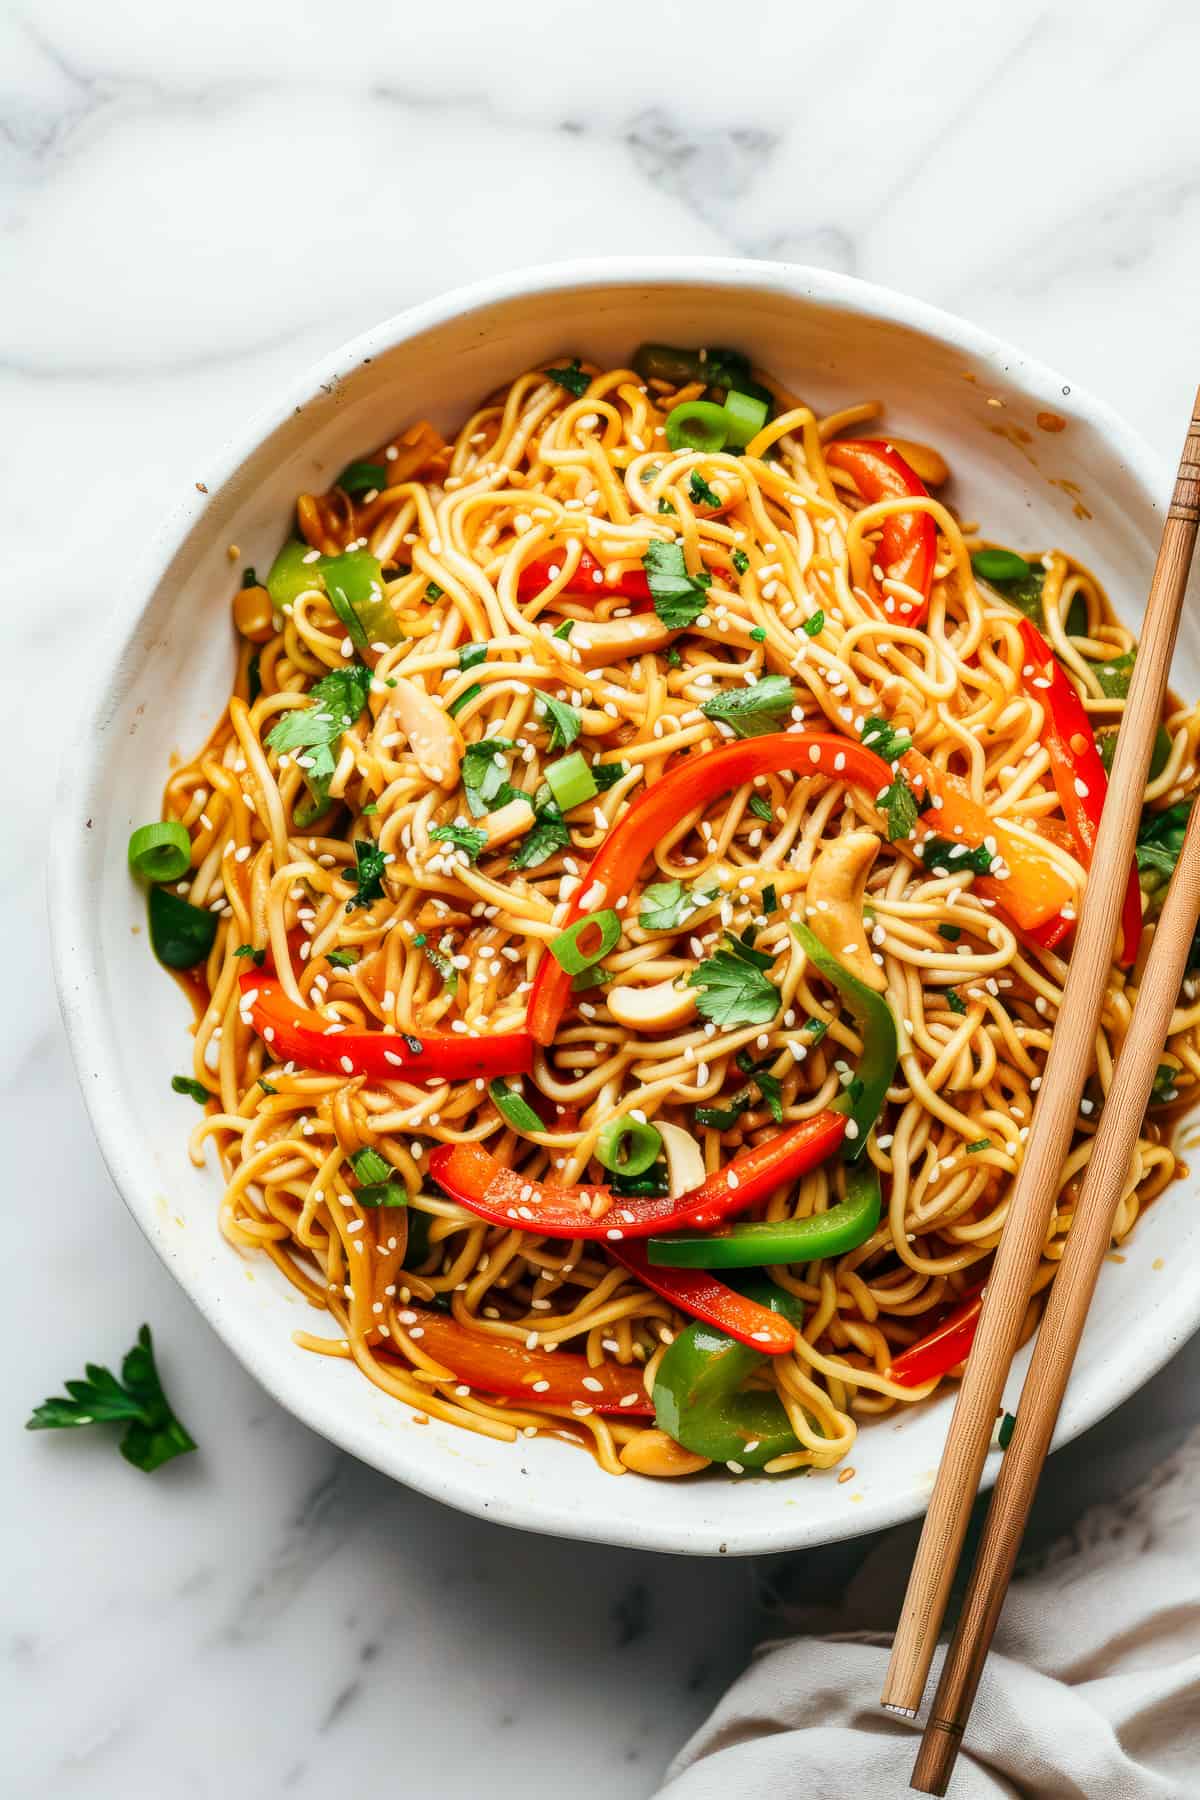 Easy 15-minute Asian-style noodles with vegetables in a white bowl.